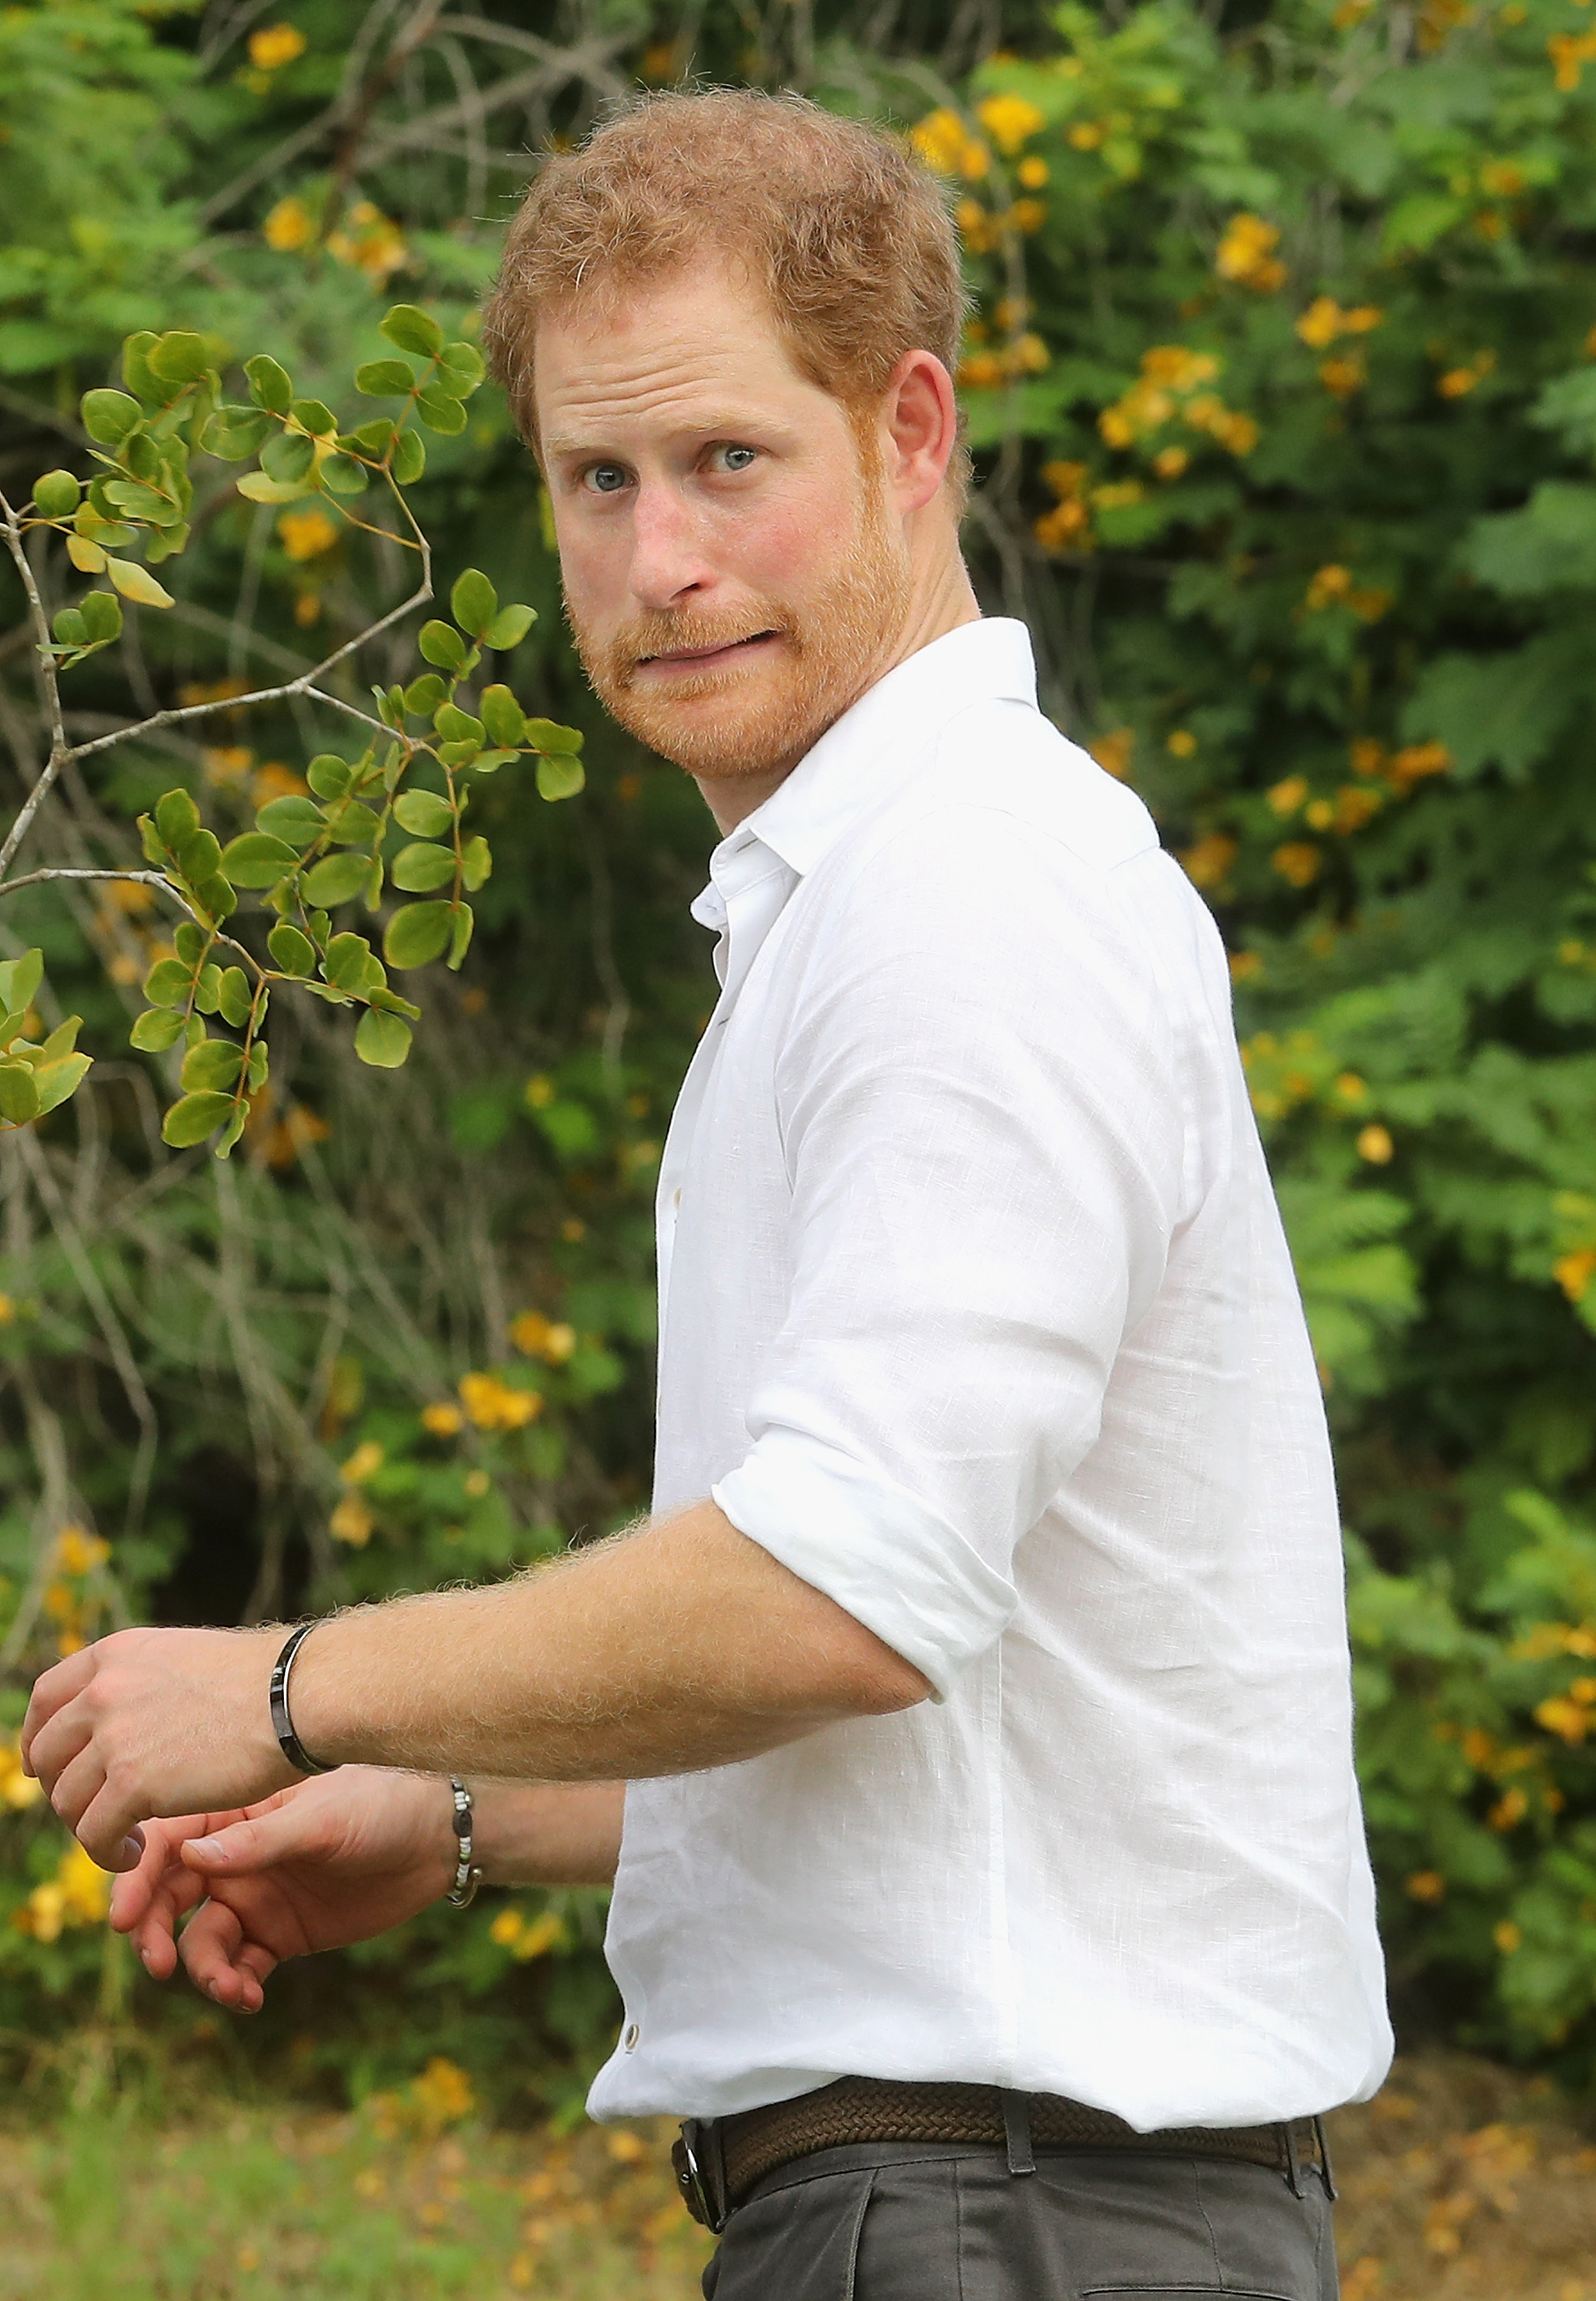 Prince Harry plants a tree on November 22, 2016 | Source: Getty Images